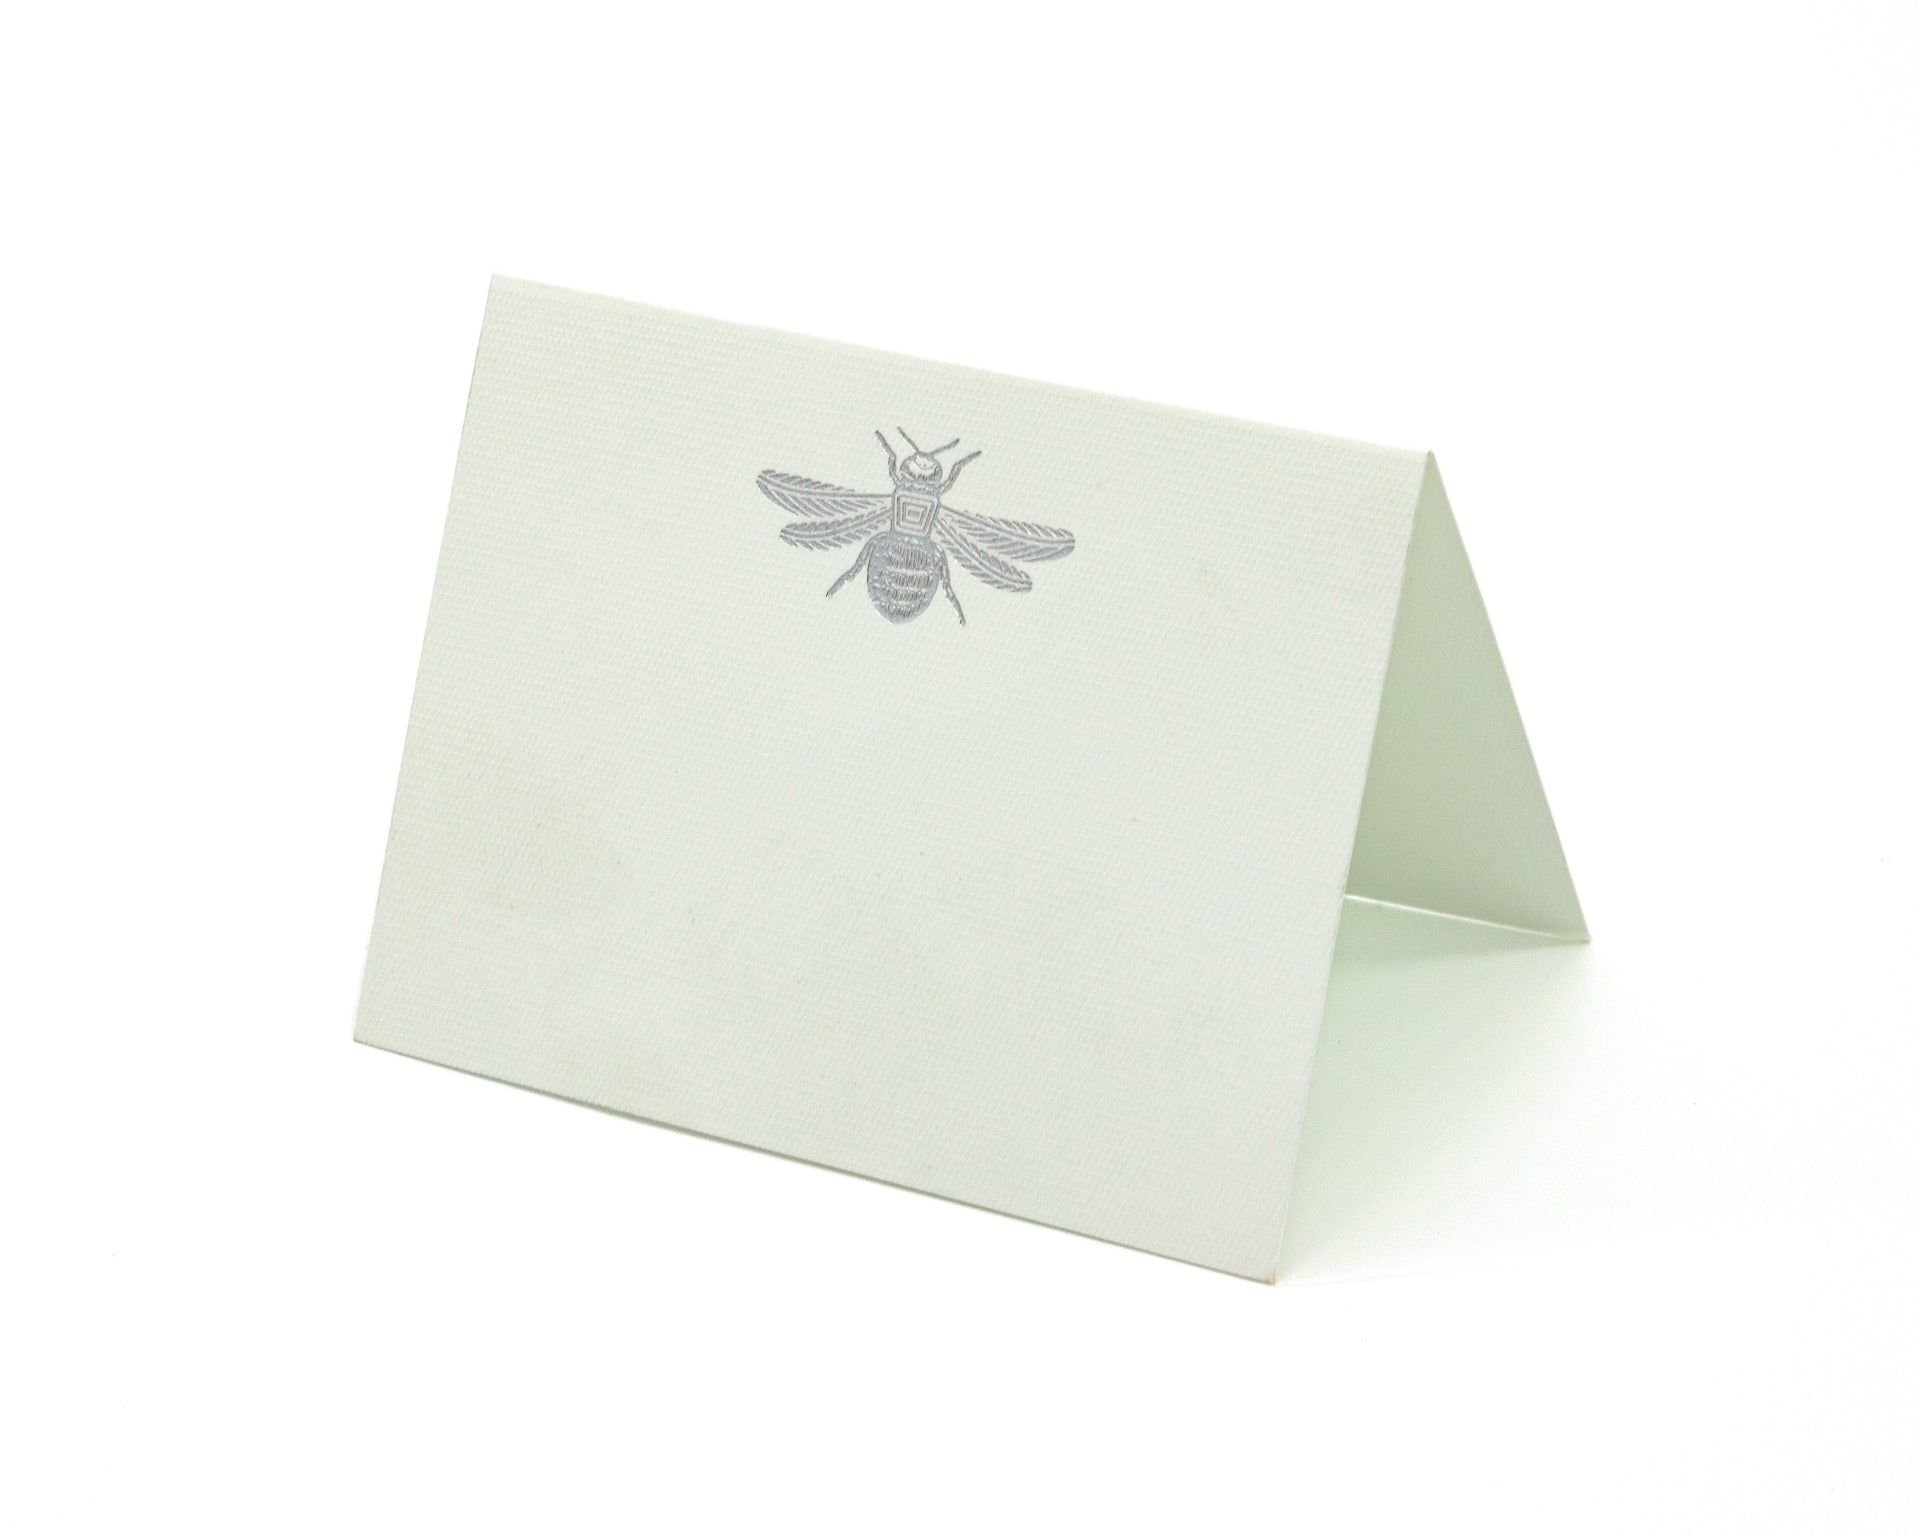 Place Cards Abeja grandes